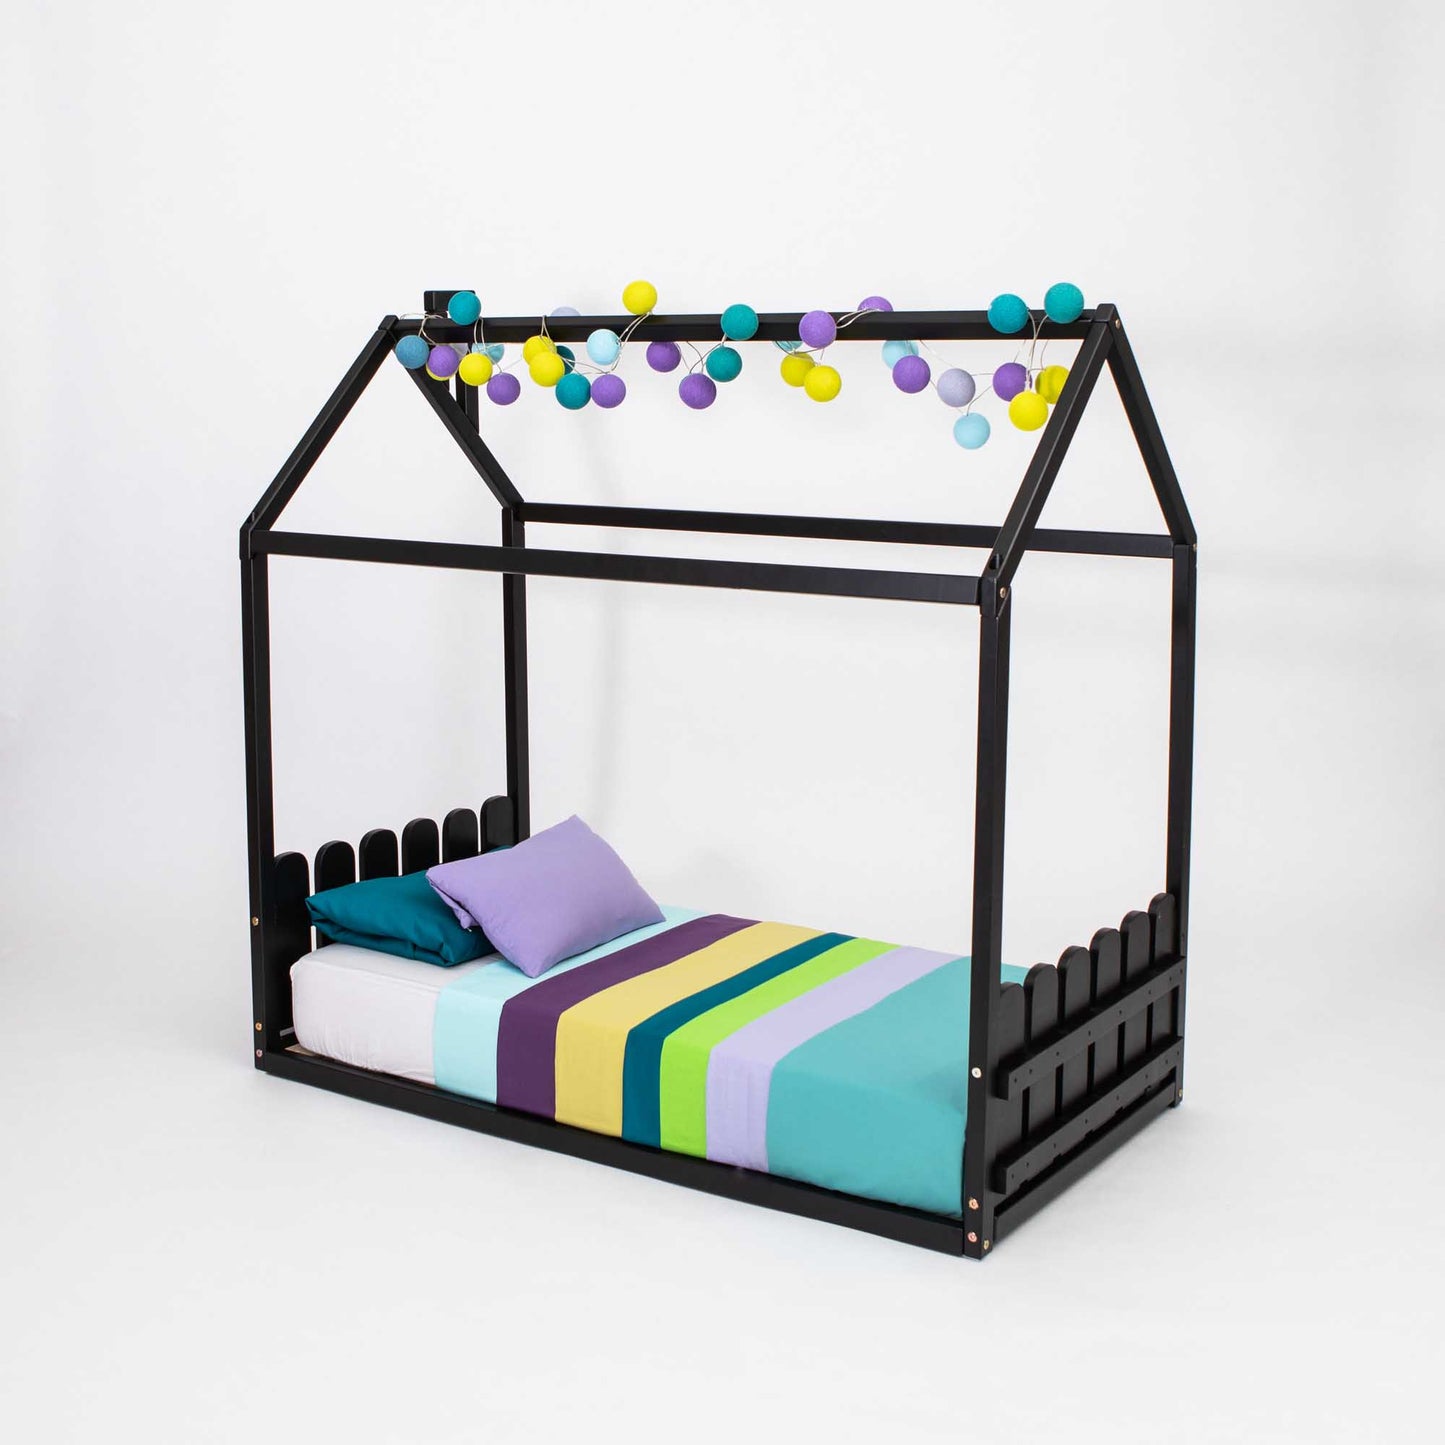 A colorful pom poms-adorned black Montessori house-frame bed with a picket fence headboard and footboard.